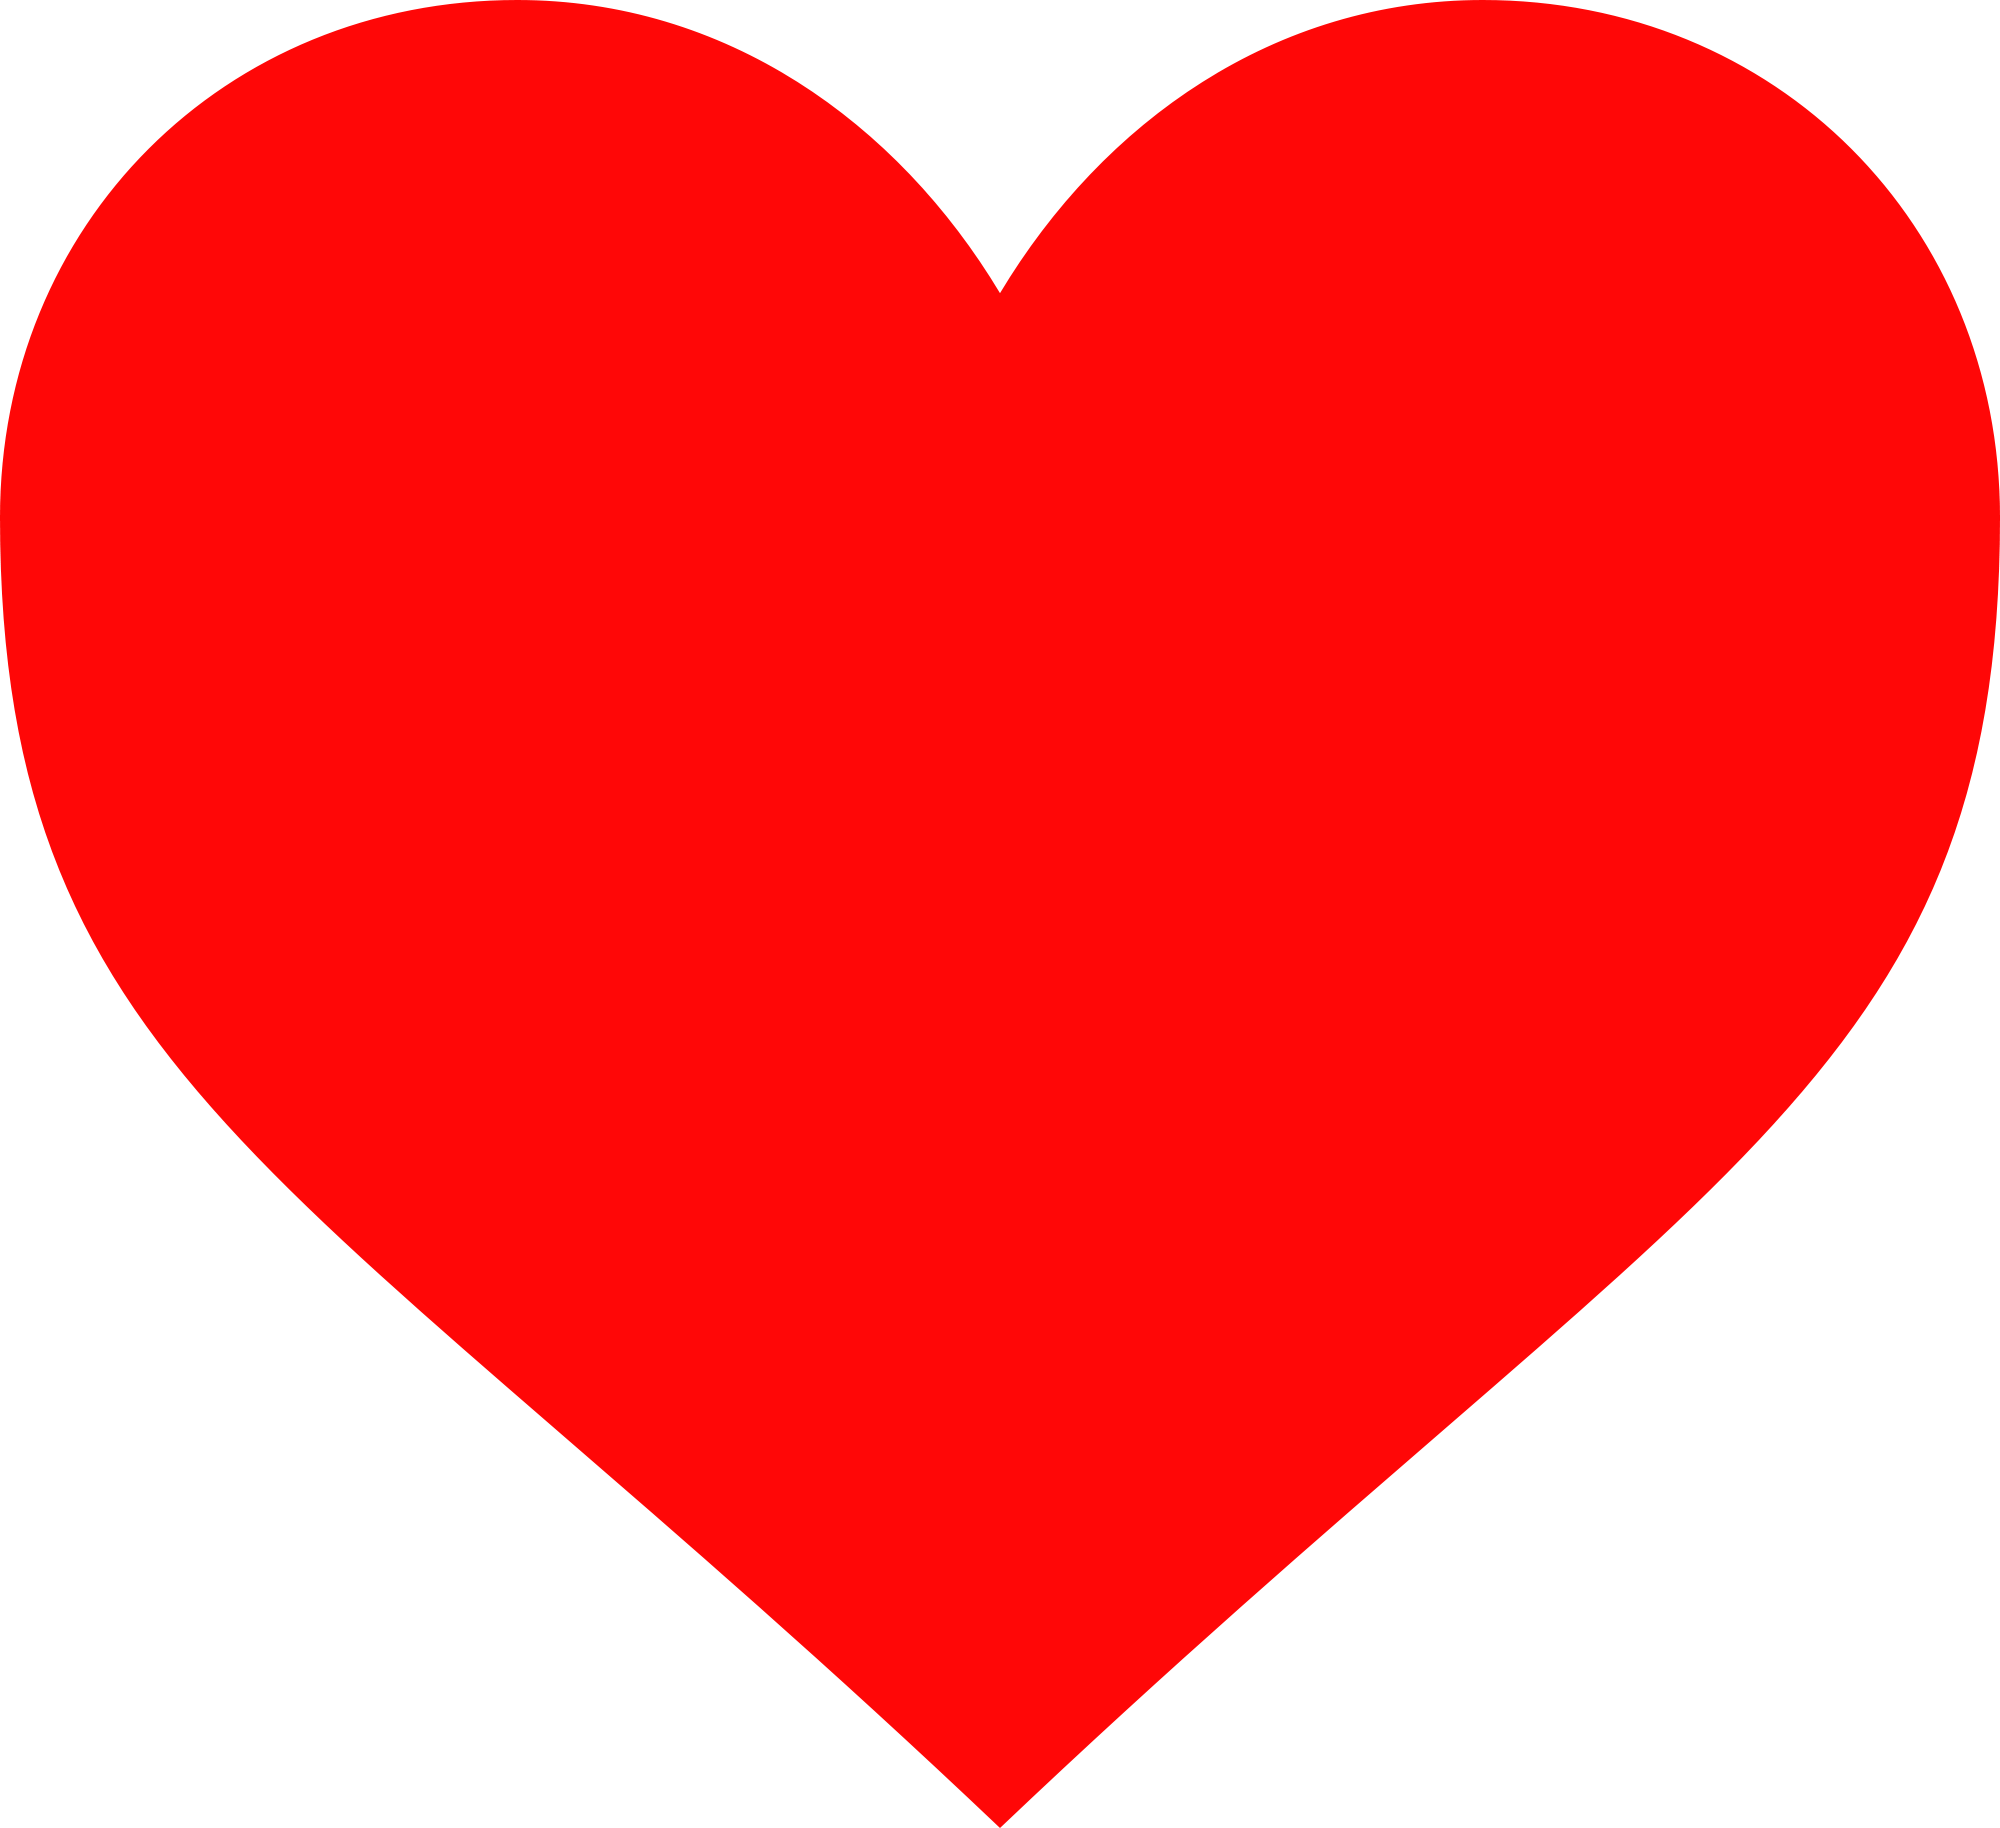 corazon-rojo-png-png-image-collection